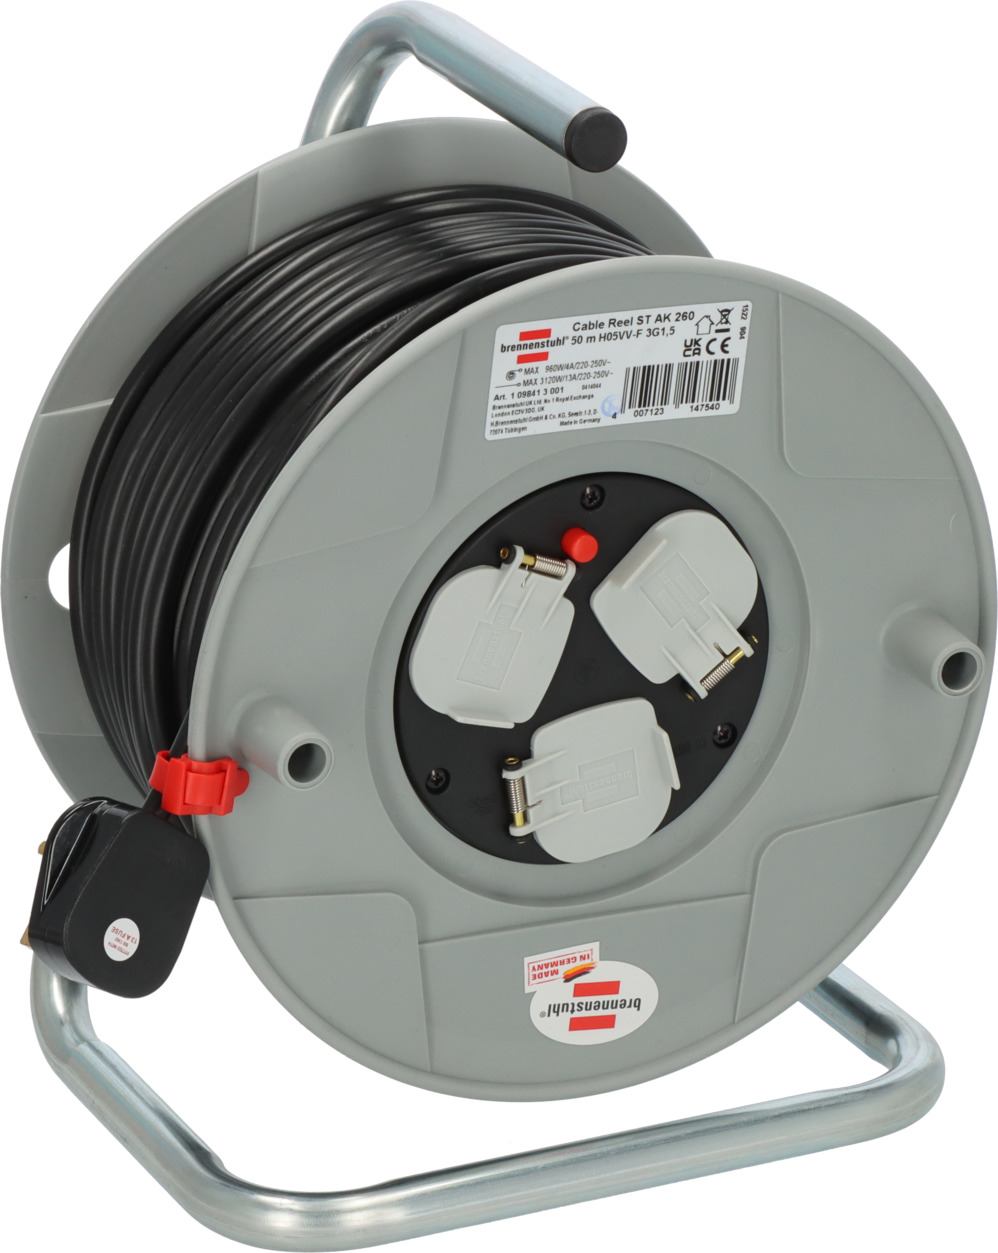 Cable extension reels - Cable Reel Manufacturers 